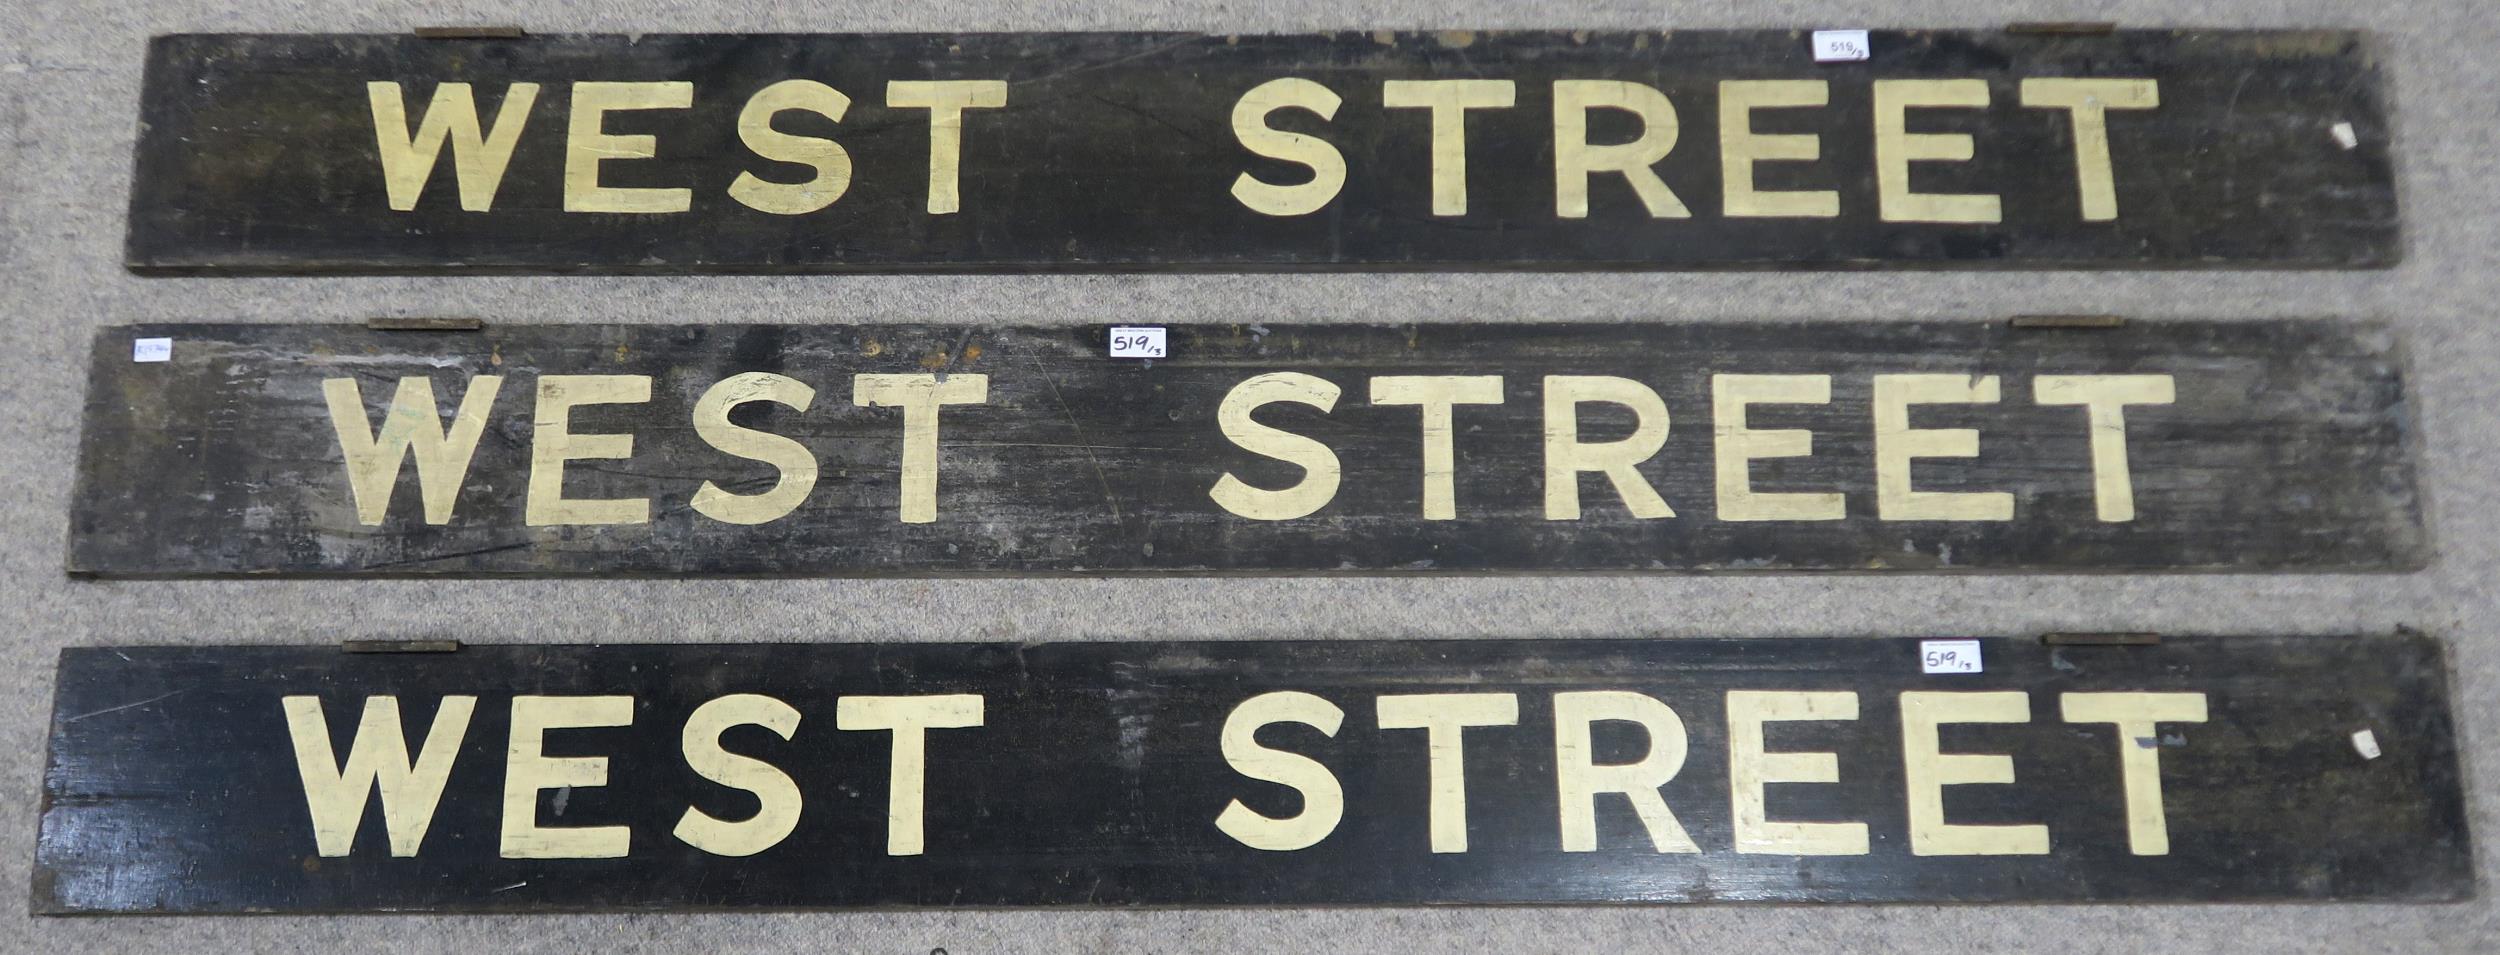 Three vintage Glasgow Subway station signs for West Street, each measuring approx. 160cm in